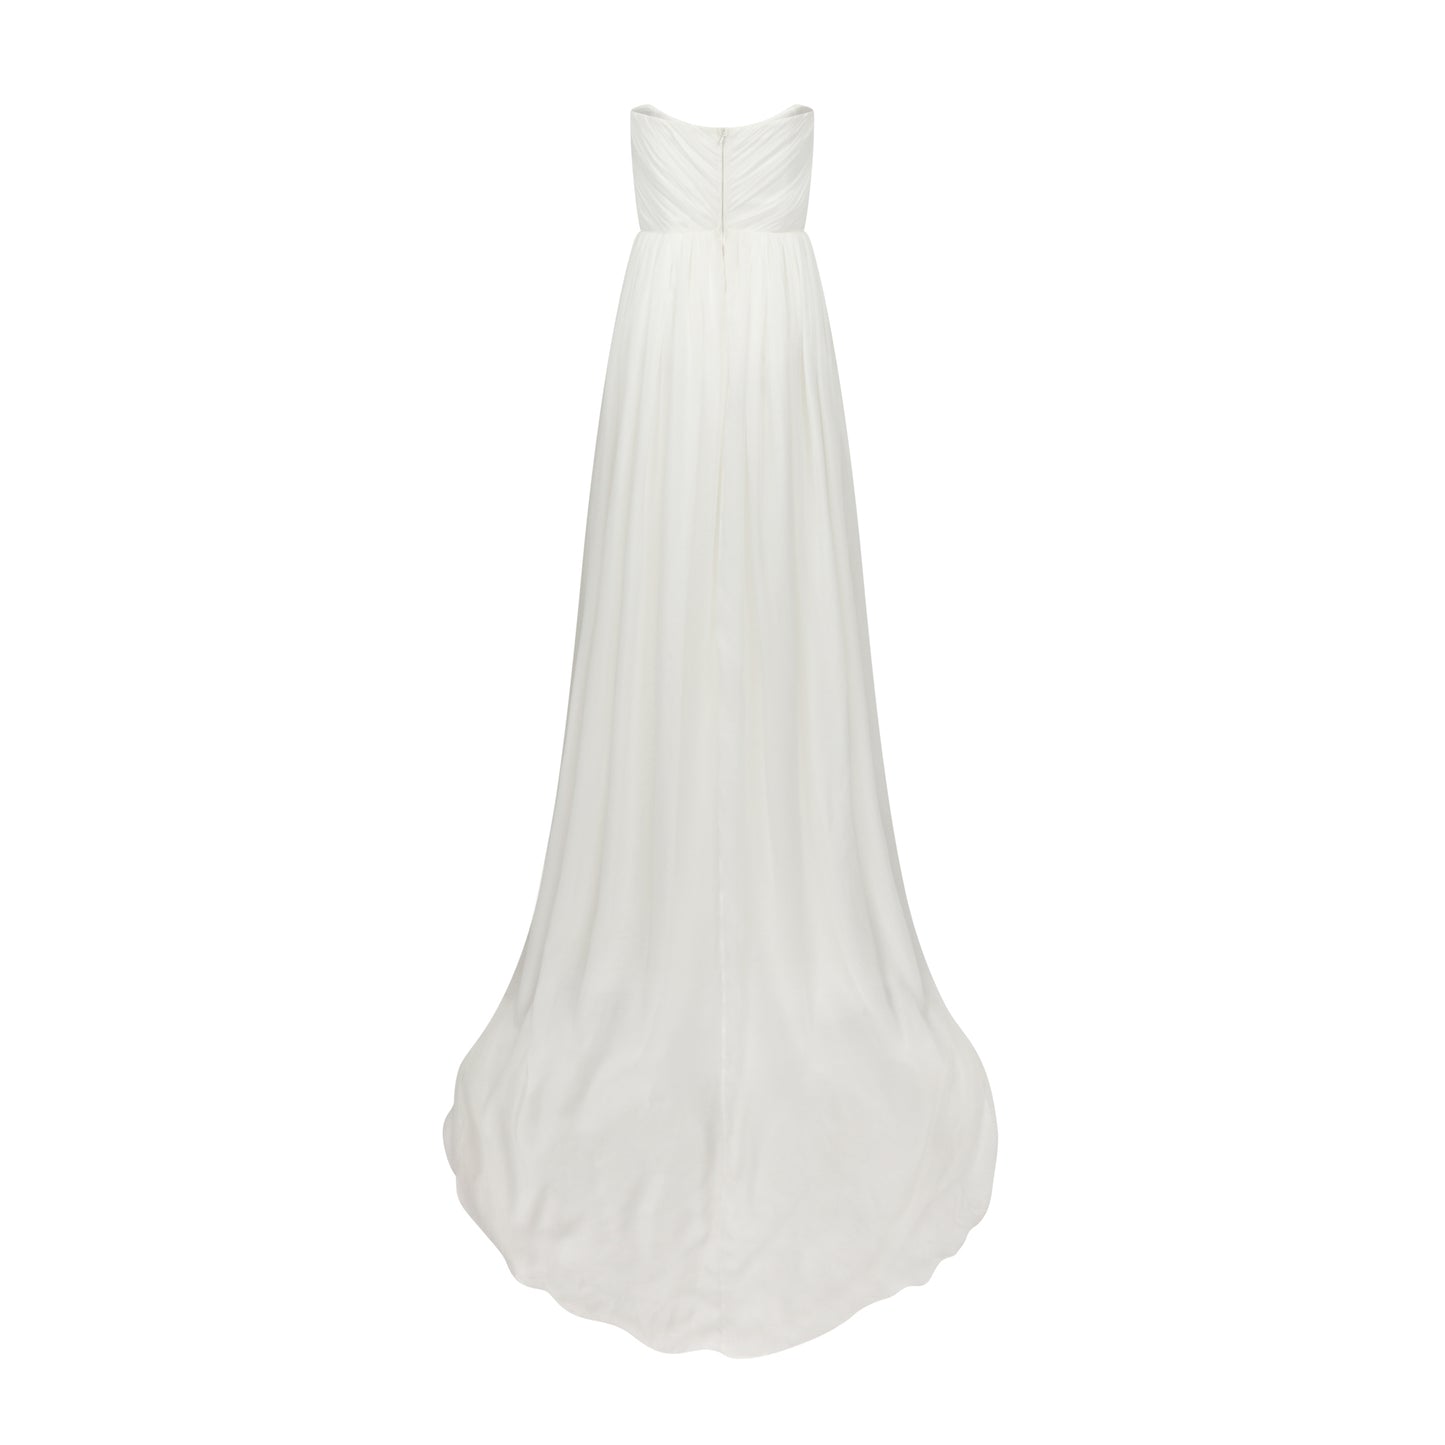 STYLE 033 // HAND PLEATED HIGH WAISTED SILK CHIFFON GOWN